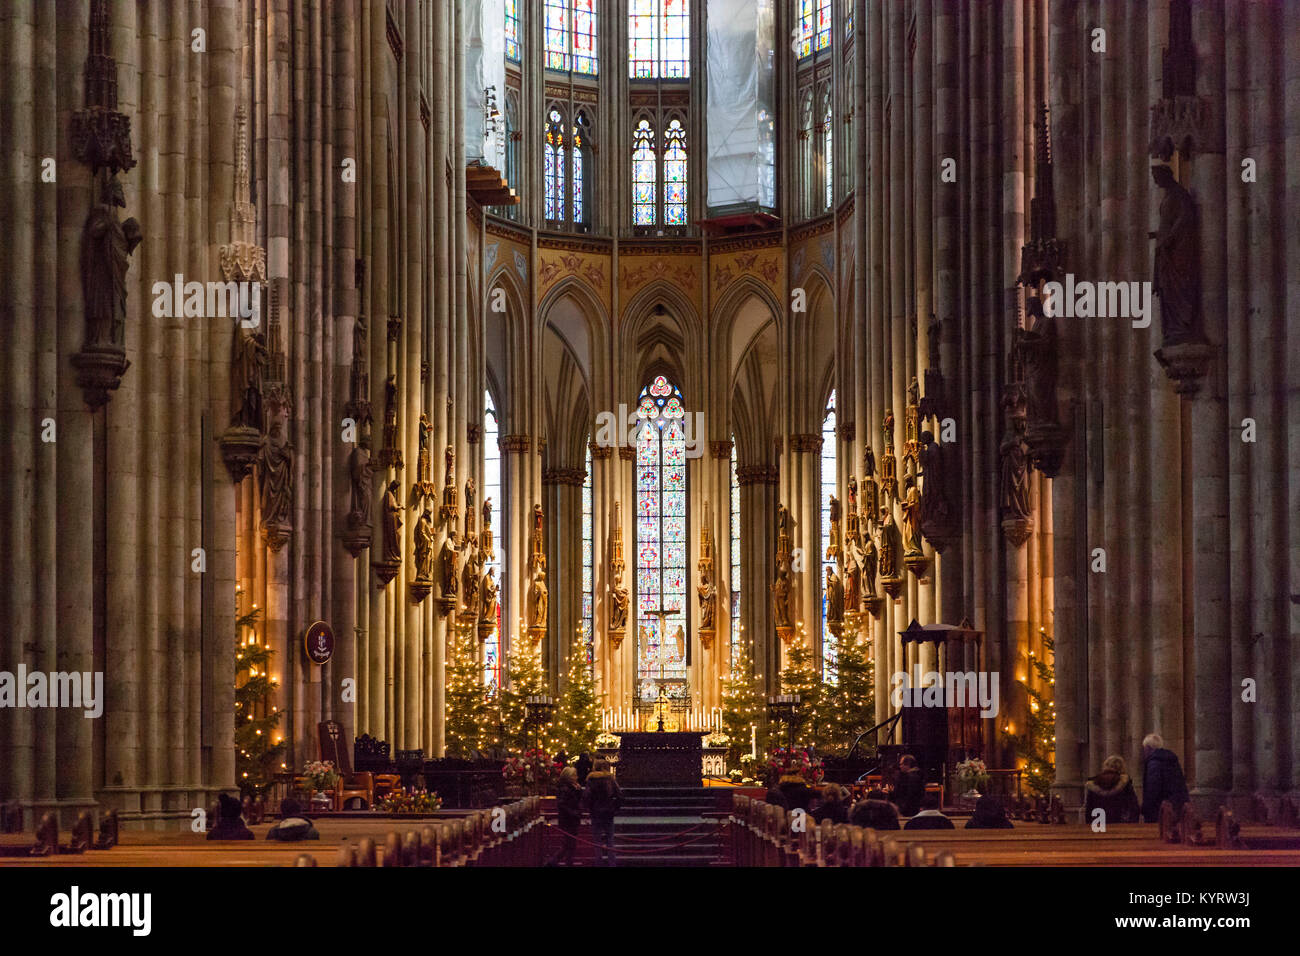 Europe, Germany, Cologne, inside the cathedral, main nave.  Europa, Deutschland, Koeln, im Dom, Langhaus. Stock Photo